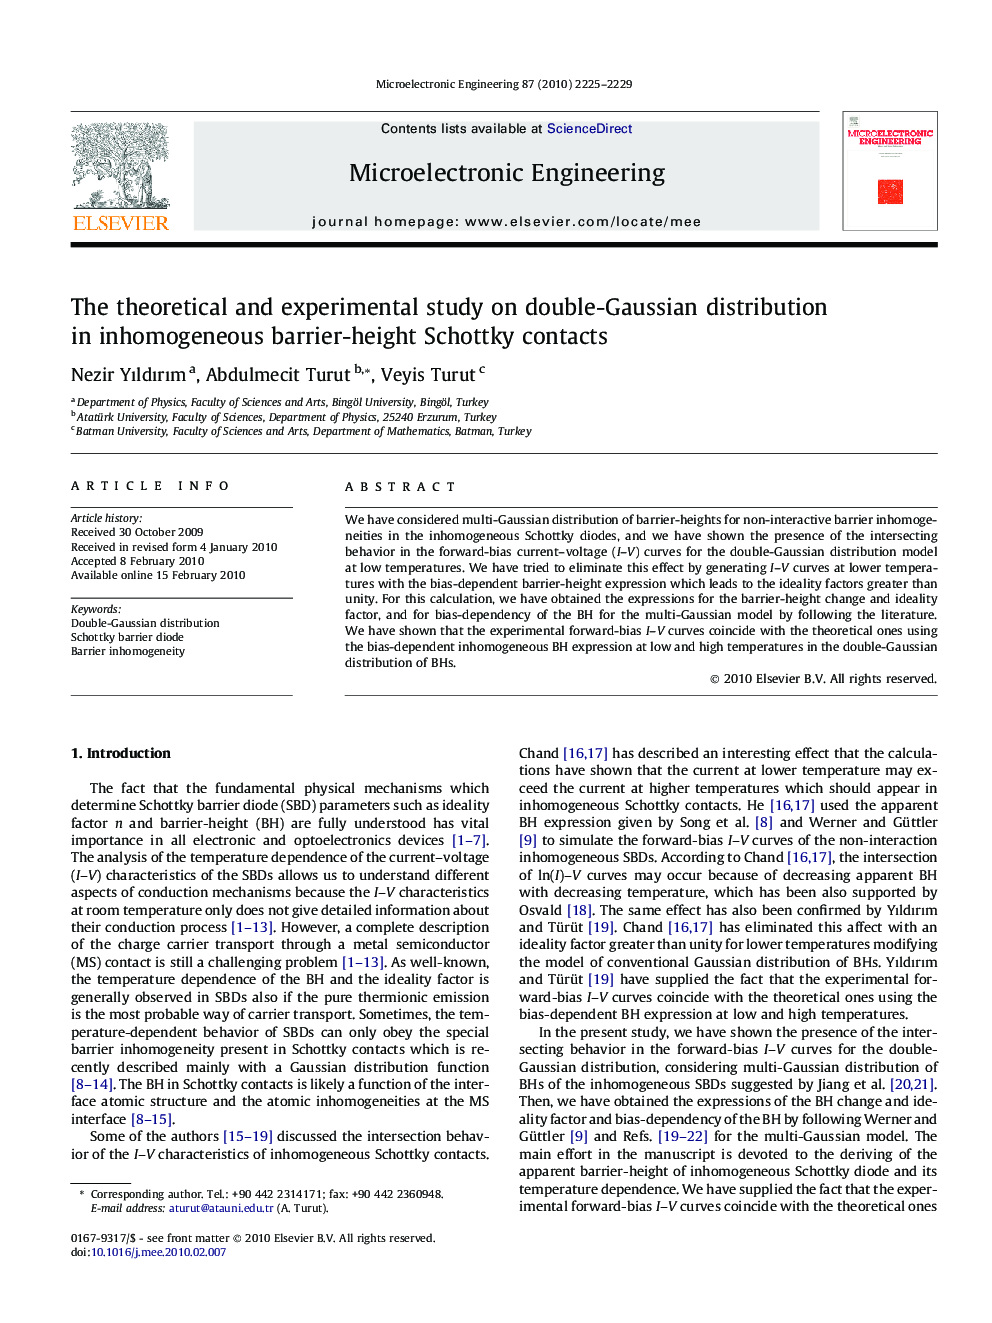 The theoretical and experimental study on double-Gaussian distribution in inhomogeneous barrier-height Schottky contacts